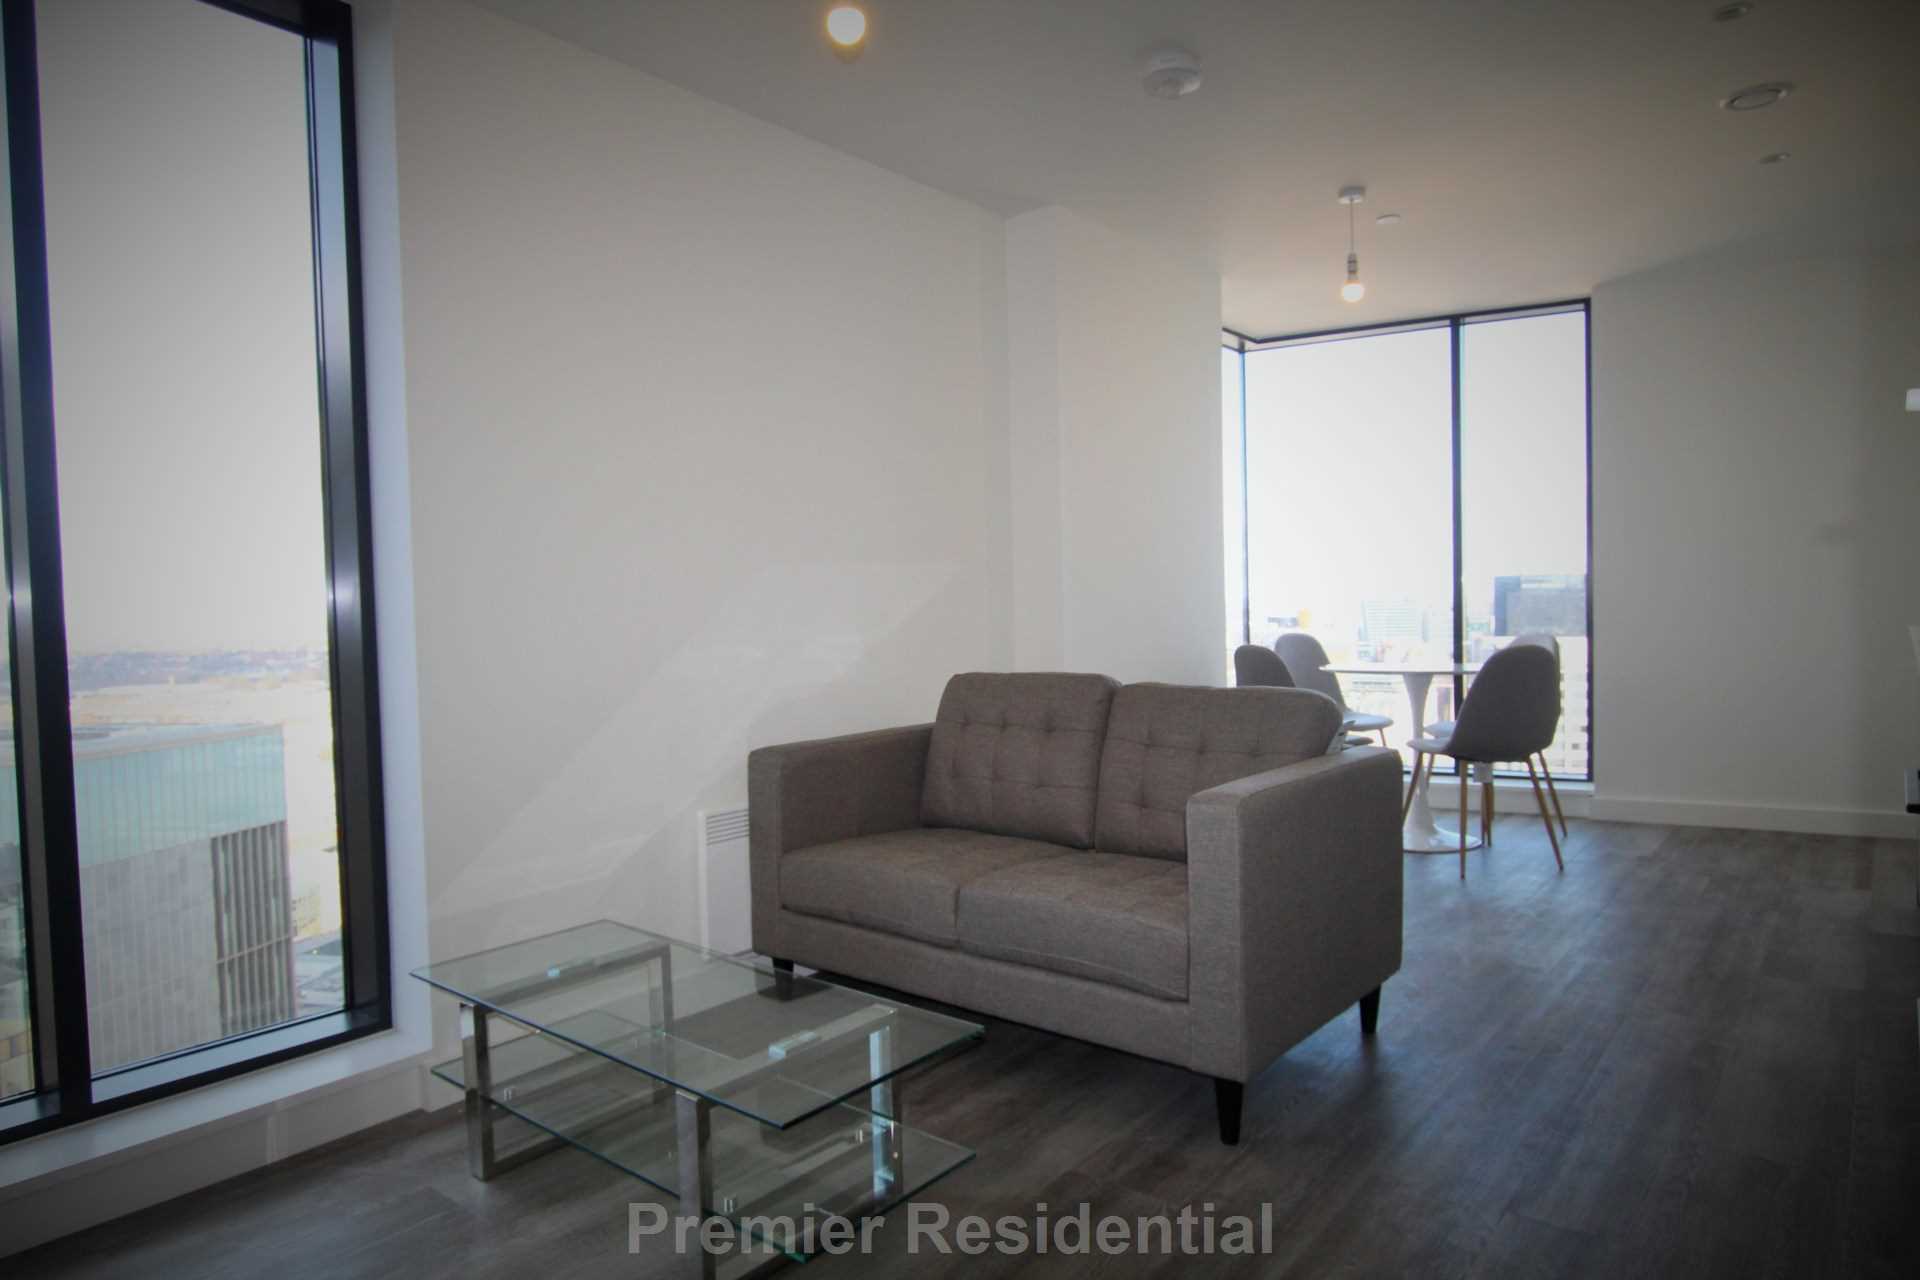 2 bed Apartment for rent in Birmingham. From Premier Residential Lettings